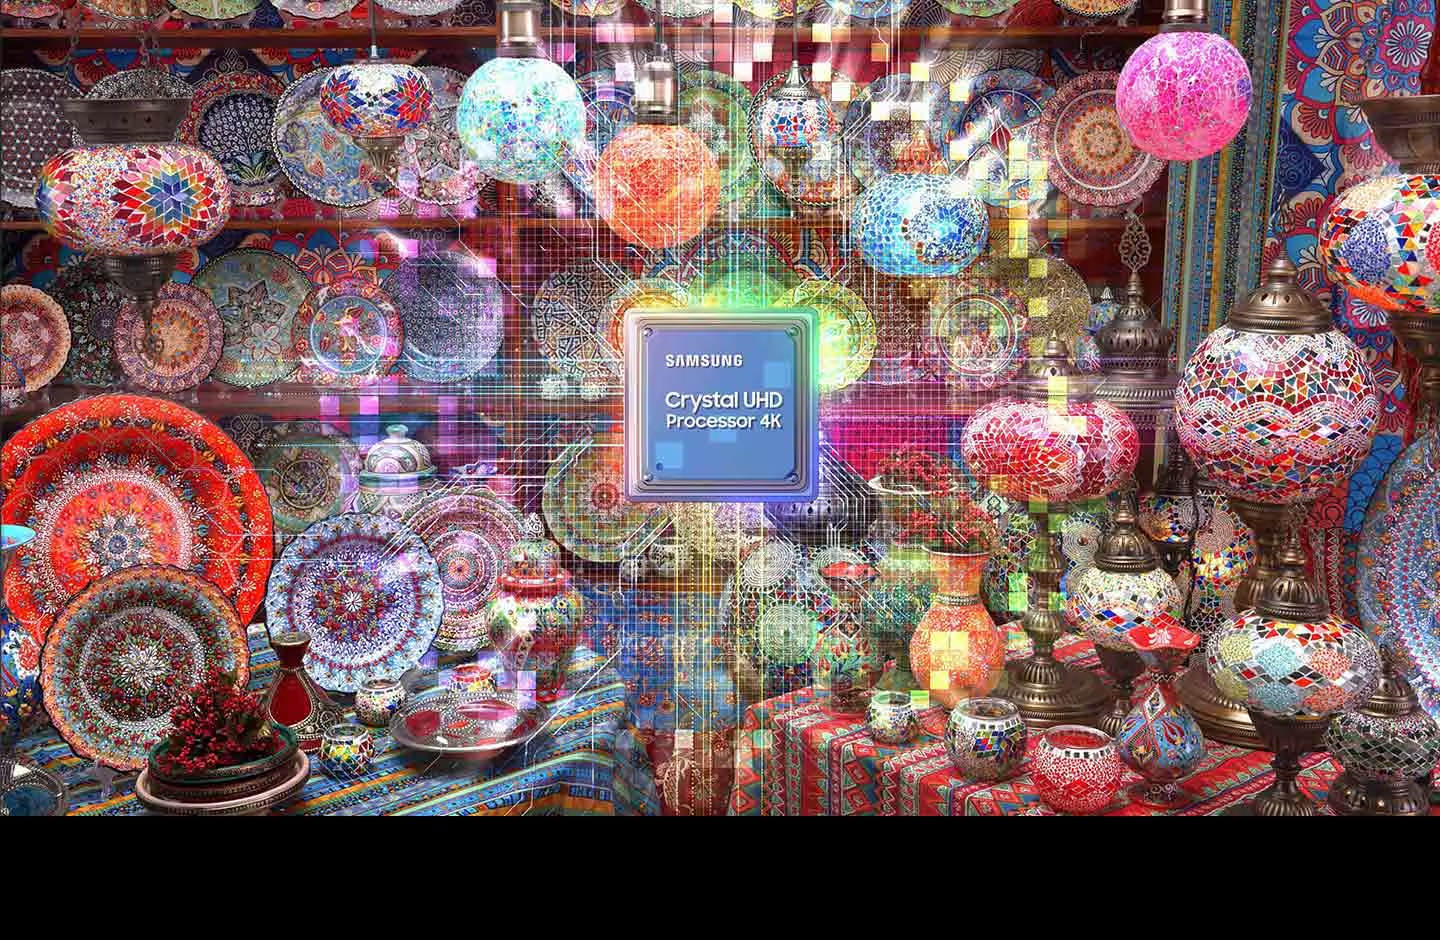 Description: The Samsung Crystal UHD Processor 4K chip is on display in the middle amidst many colorful plates and ornaments.